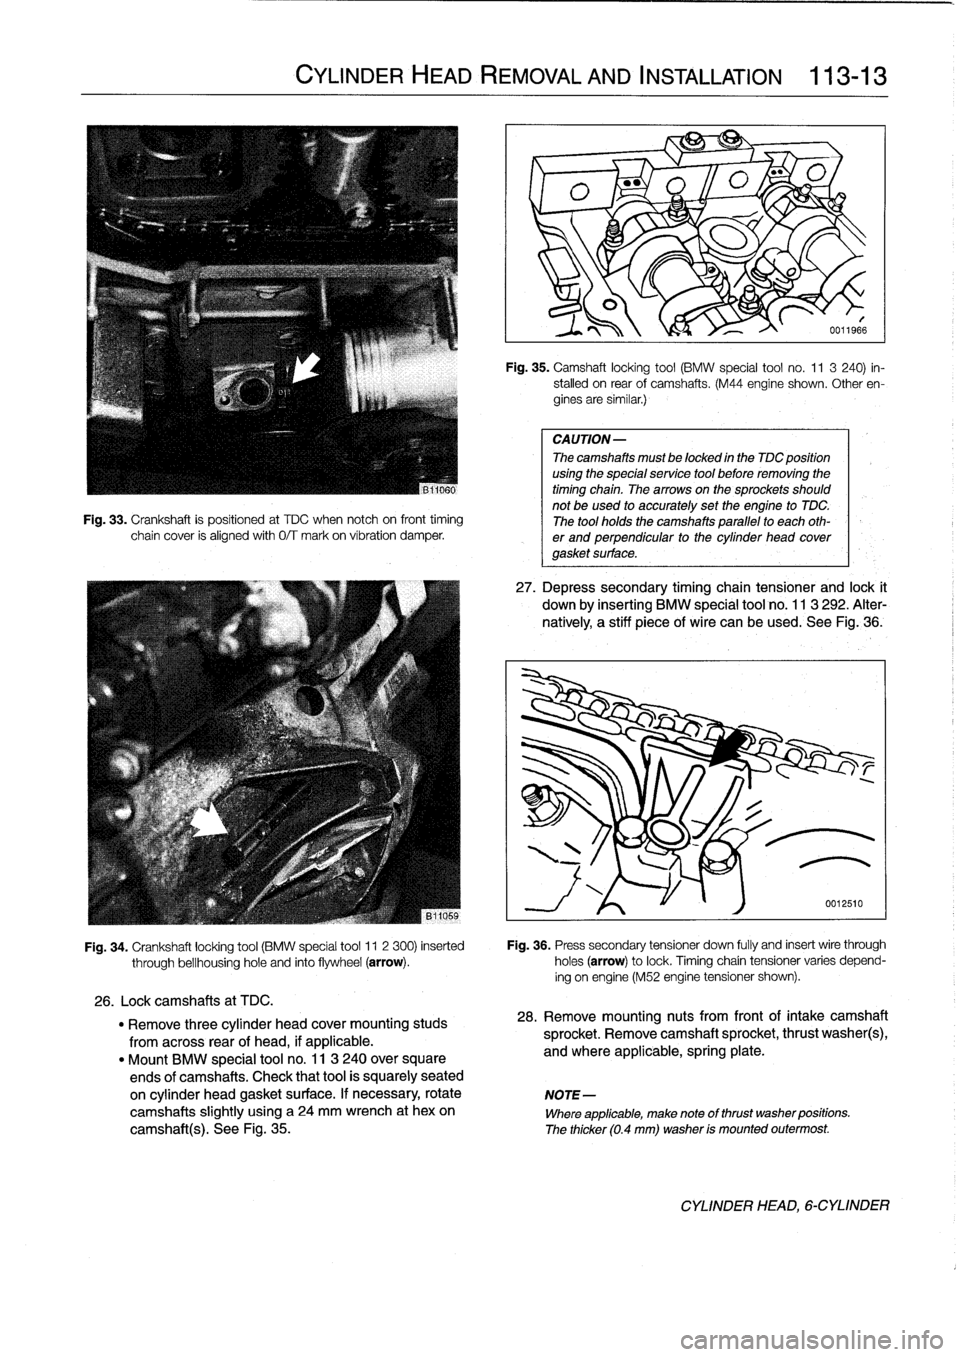 BMW 318i 1992 E36 Workshop Manual 
Fig
.
33
.
Crankshaft
is
positioned
at
TDC
when
notch
oh
front
timing
chain
cover
is
alignedwith
0/T
mark
on
víbration
damper
.

CYLINDER
HEAD
REMOVAL
AND
INSTALLATION

	

113-
1
3

Fig
.
35
.
Camsh